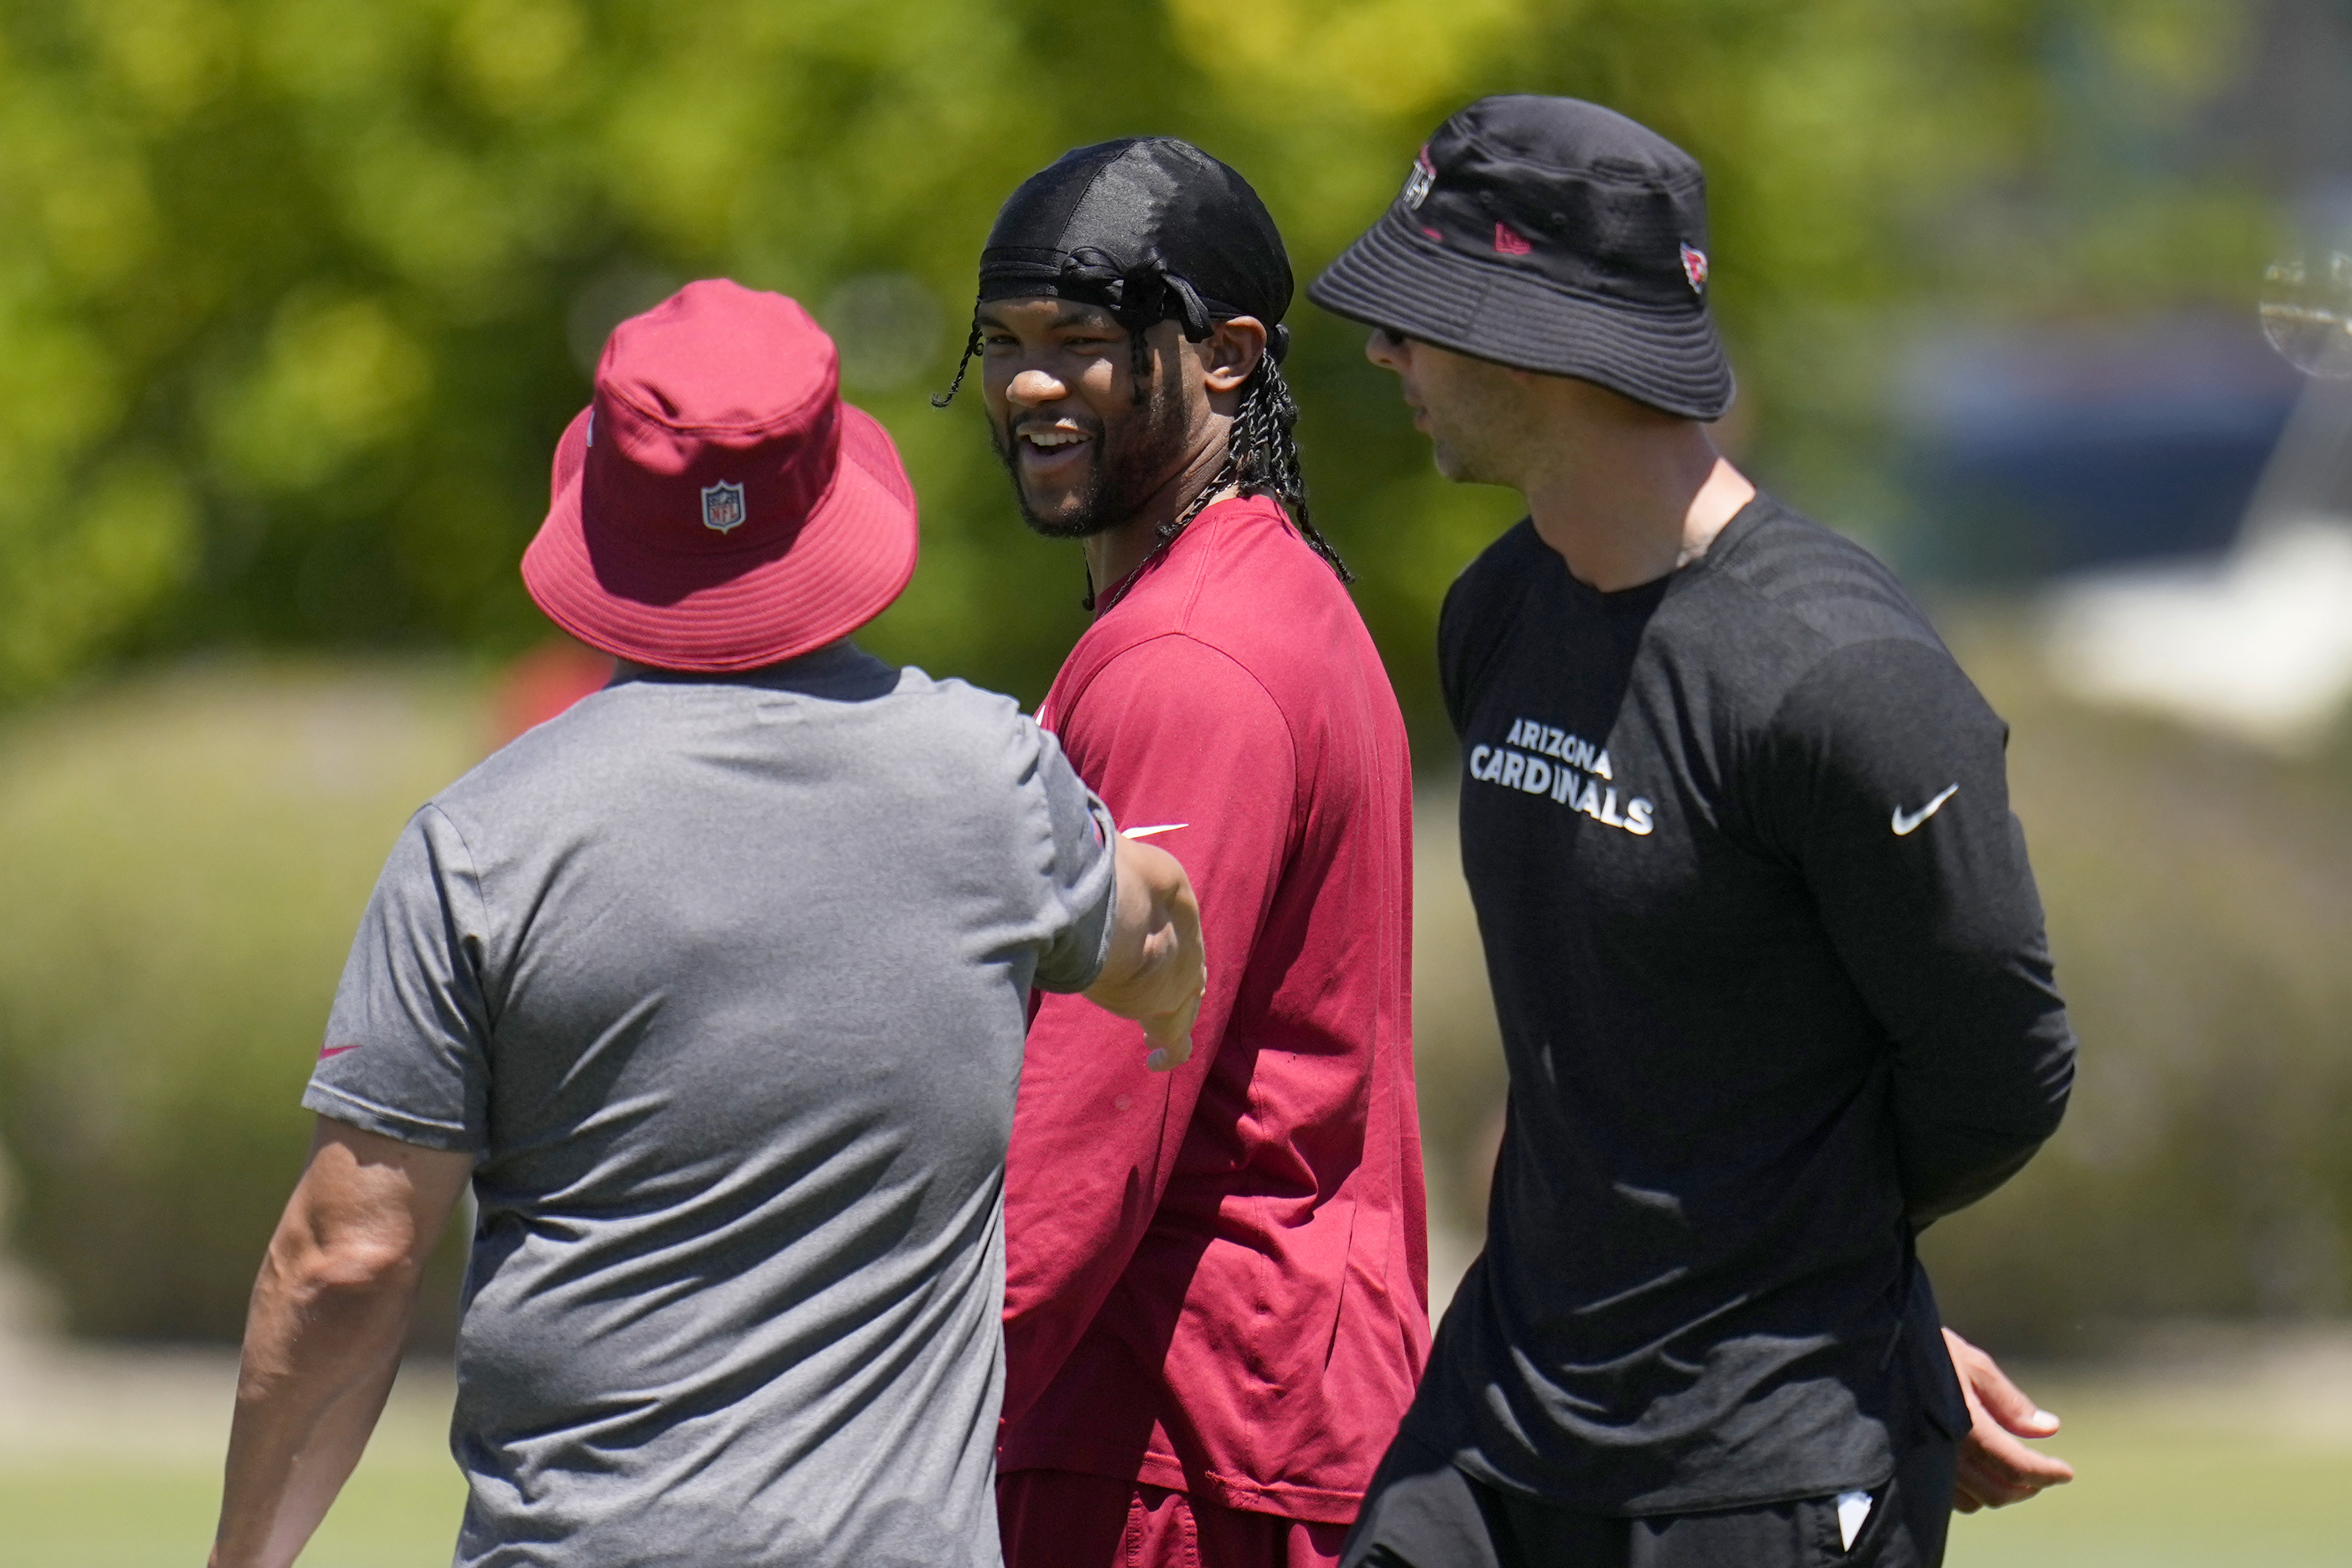 3 things about Arizona Cardinals Red-White Practice